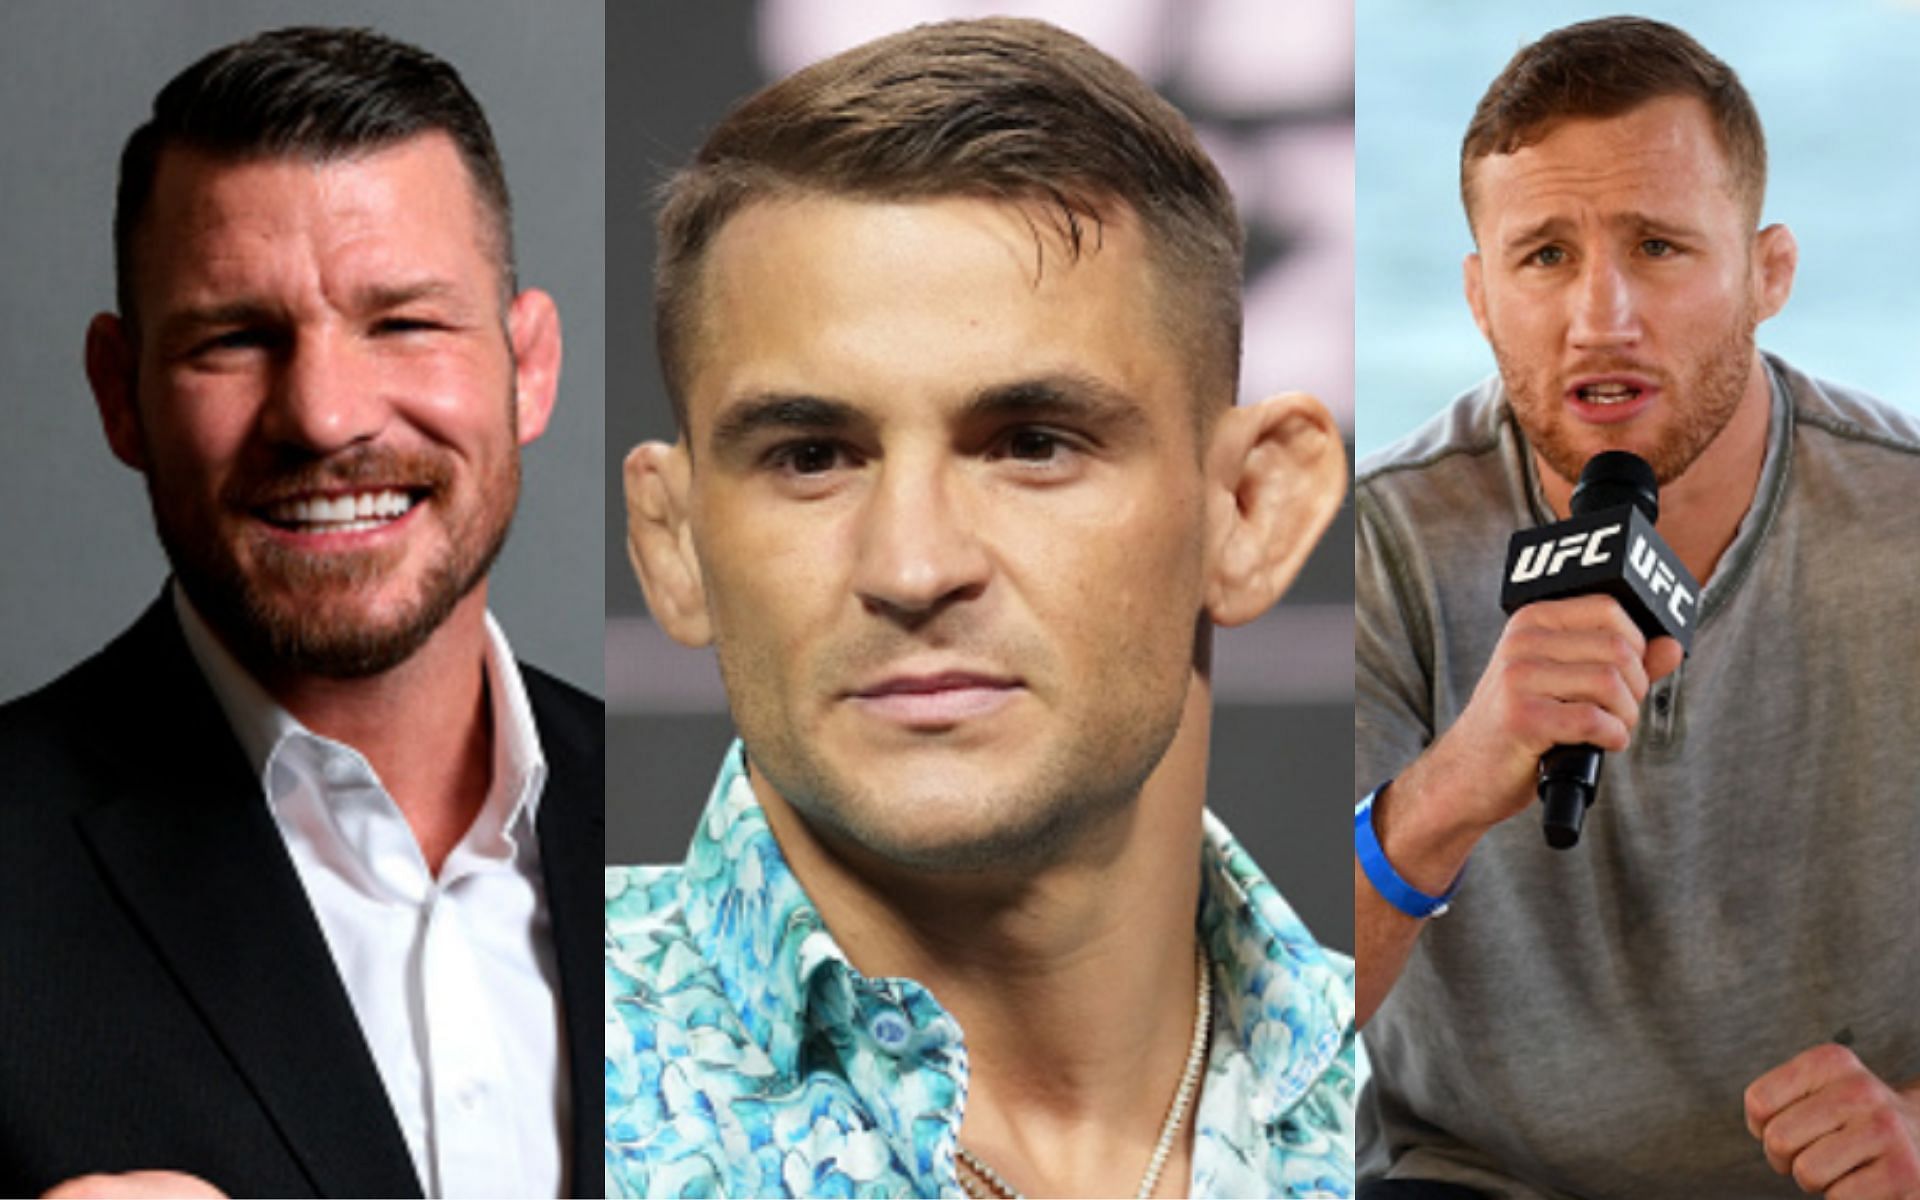 Michael Bisping (left); Dustin Poirier (center) defeated Justin Gaethje (right) in 2018